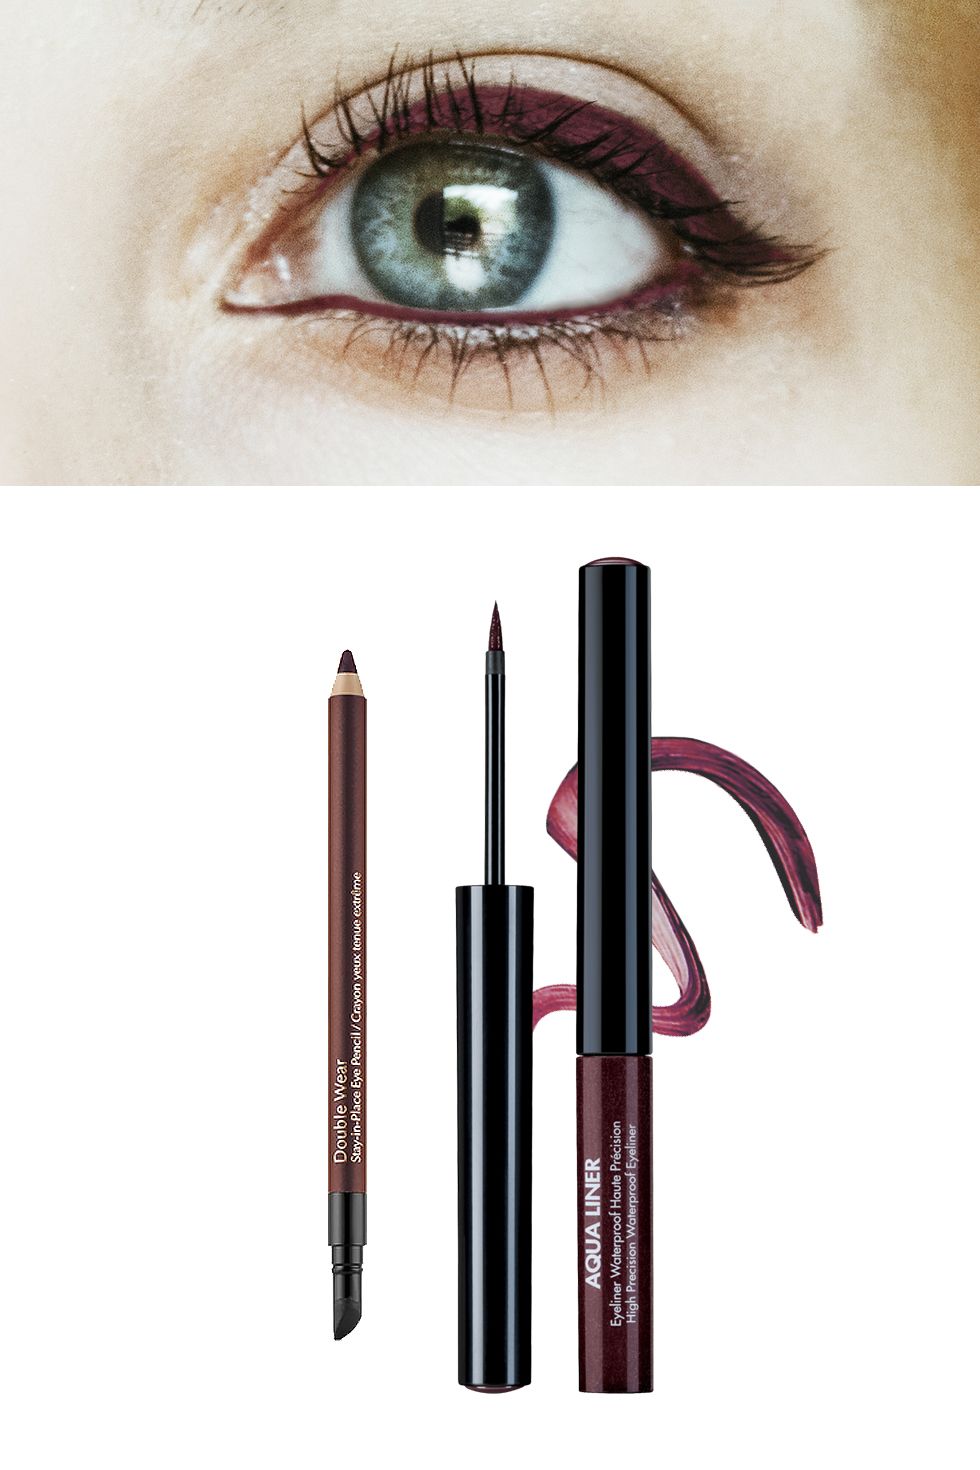 <p>Accentuate the blue amidst the gray-scale with a contrasty vivid red-brown. The wine hue will not only make your eyes pop, but make you feel as warm and fuzzy as a glass of merlot.</p><p>Try: <a href="http://www.sephora.com/aqua-liner-P286205?skuId=1325414&om_mmc=ppc-GG&mkwid=sPEW3QaG7&pcrid=49113159039&pdv=c&site=_search&country_switch=&lang=en&gclid=CLfmyNvo98gCFUQYHwodNdUMTw" target="_blank">Make Up For Ever Aqua Liner in Sparkling Plum Burgundy</a><span class="redactor-invisible-space"> ($23) or <a href="http://bit.ly/1RwjF3O" target="_blank">Estee Lauder Double Wear Stay-in-Place Eye Pencil in Burgundy Suede</a><span class="redactor-invisible-space"><a href="http://bit.ly/1RwjF3O"></a> ($23).</span></span></p>